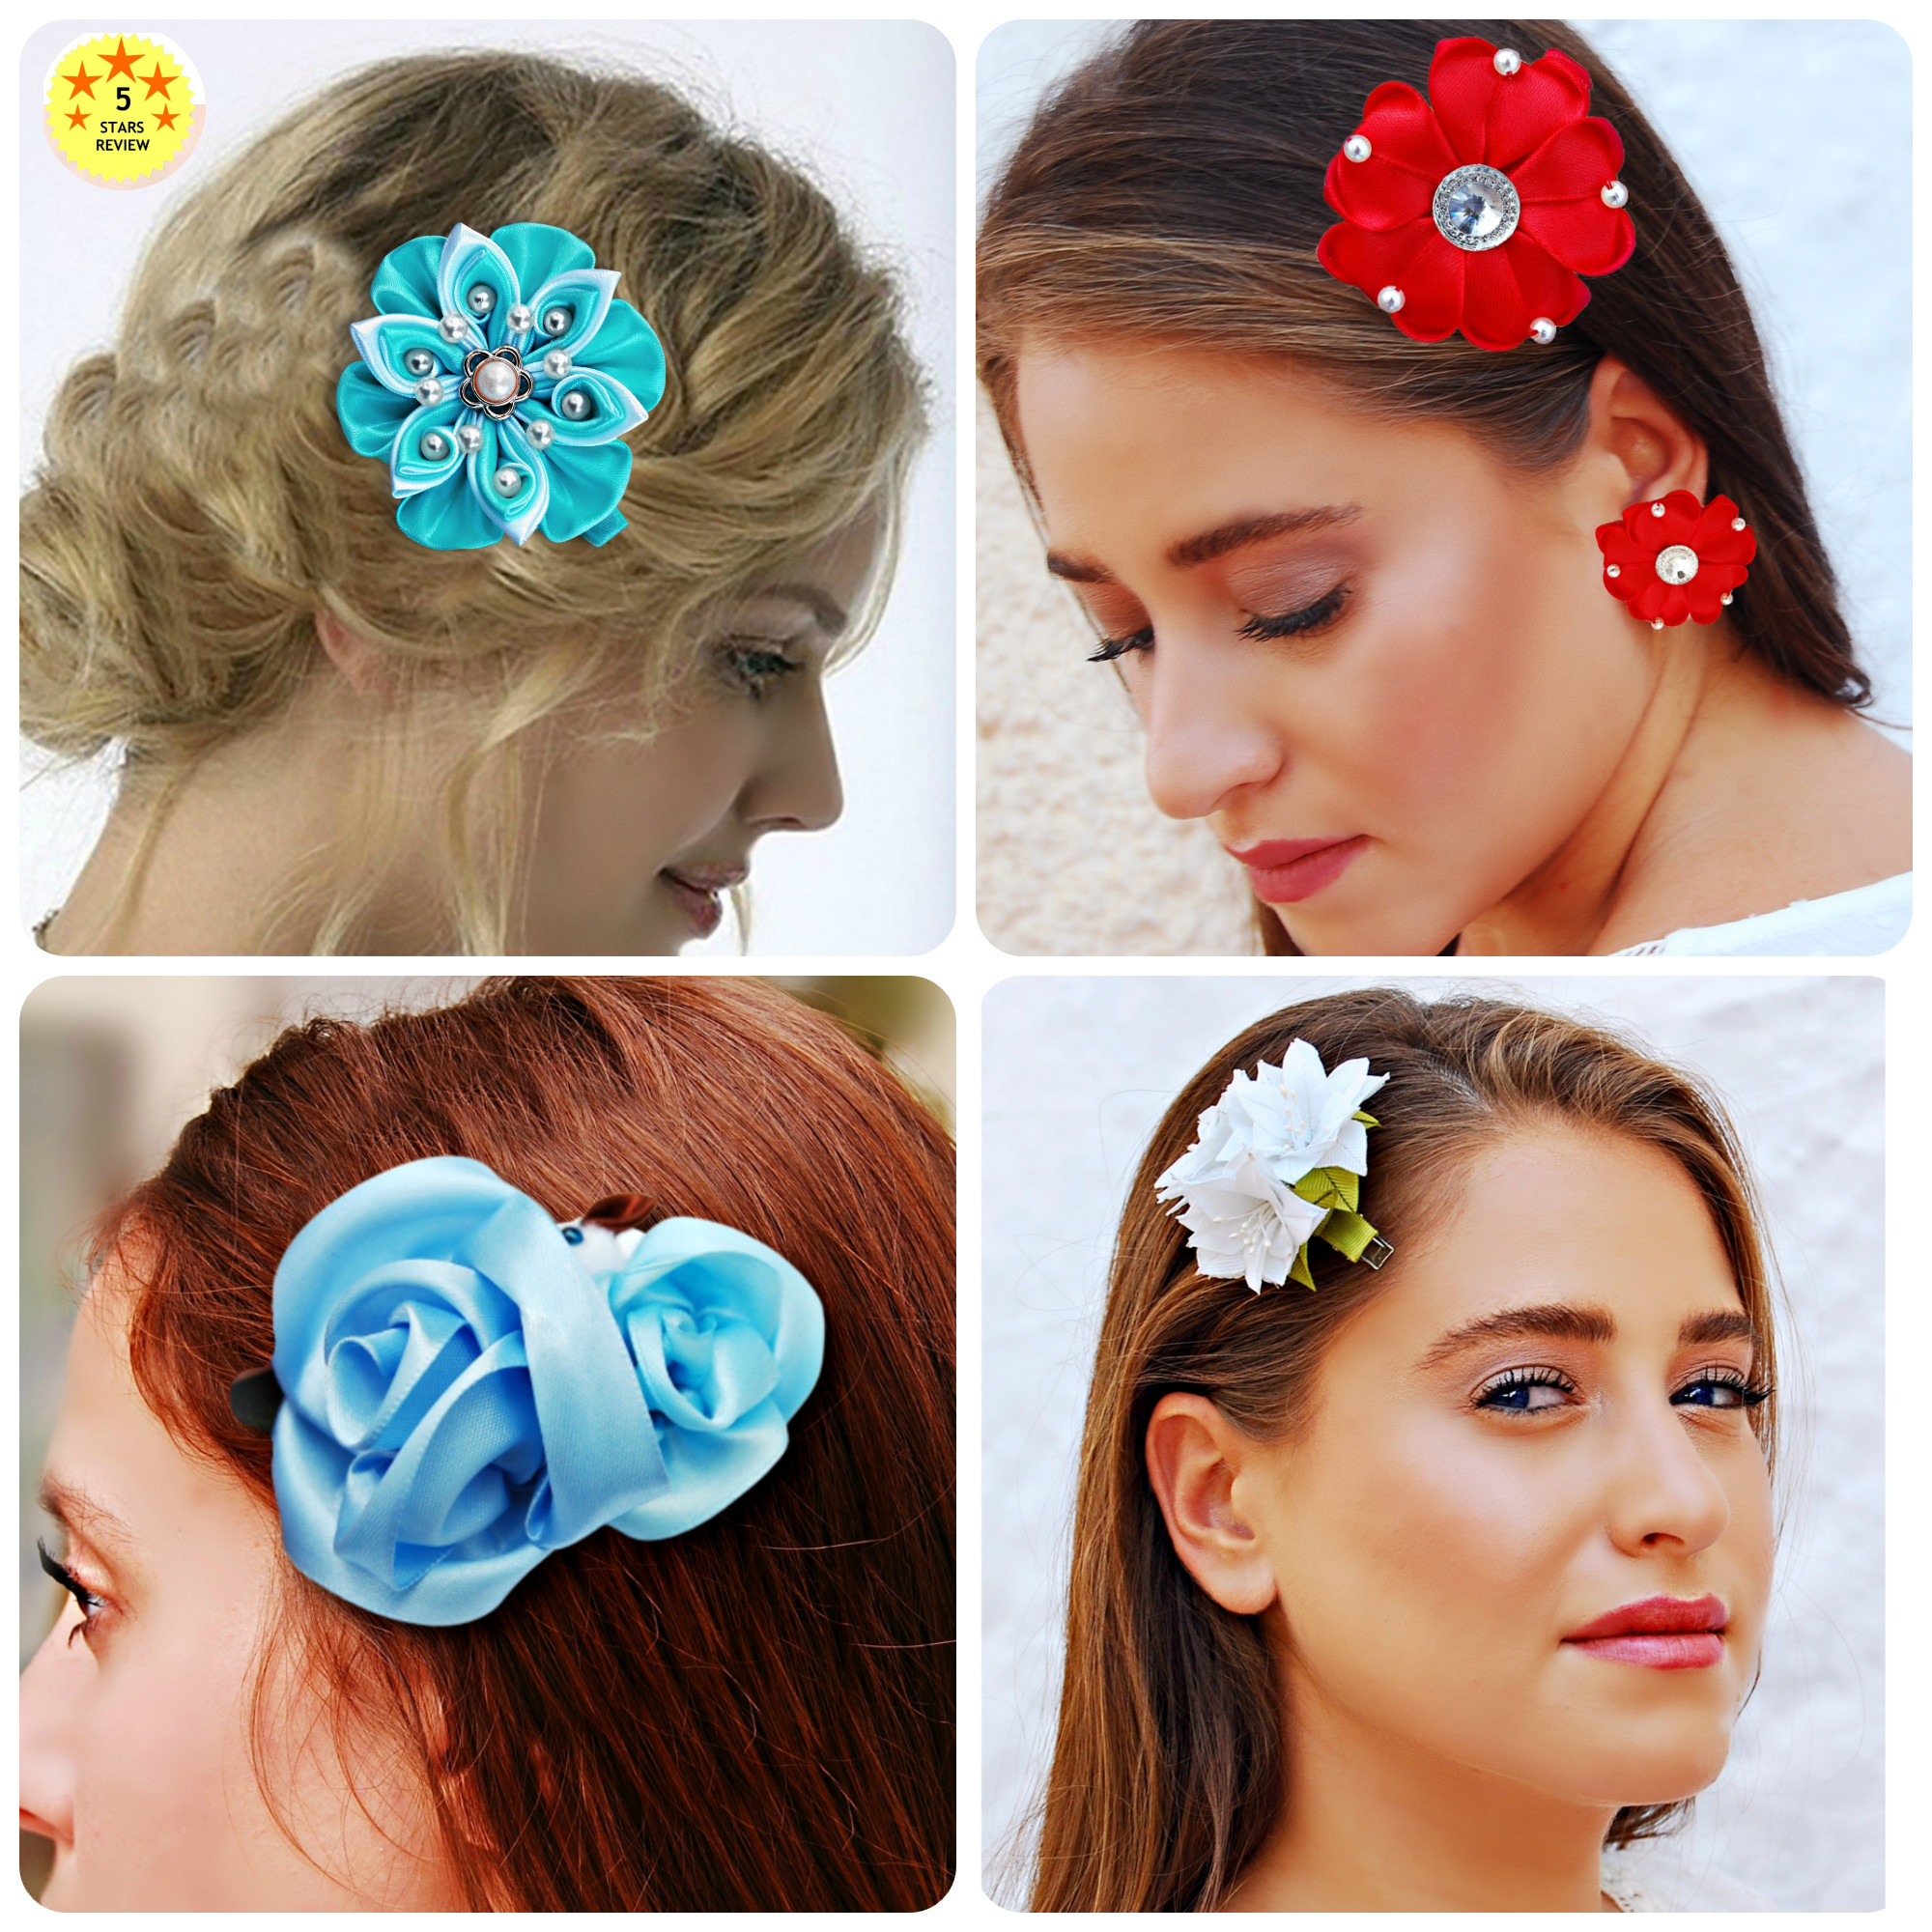 You are currently viewing 6 ‘must have’ hair accessories tailored for your next Zoom call.